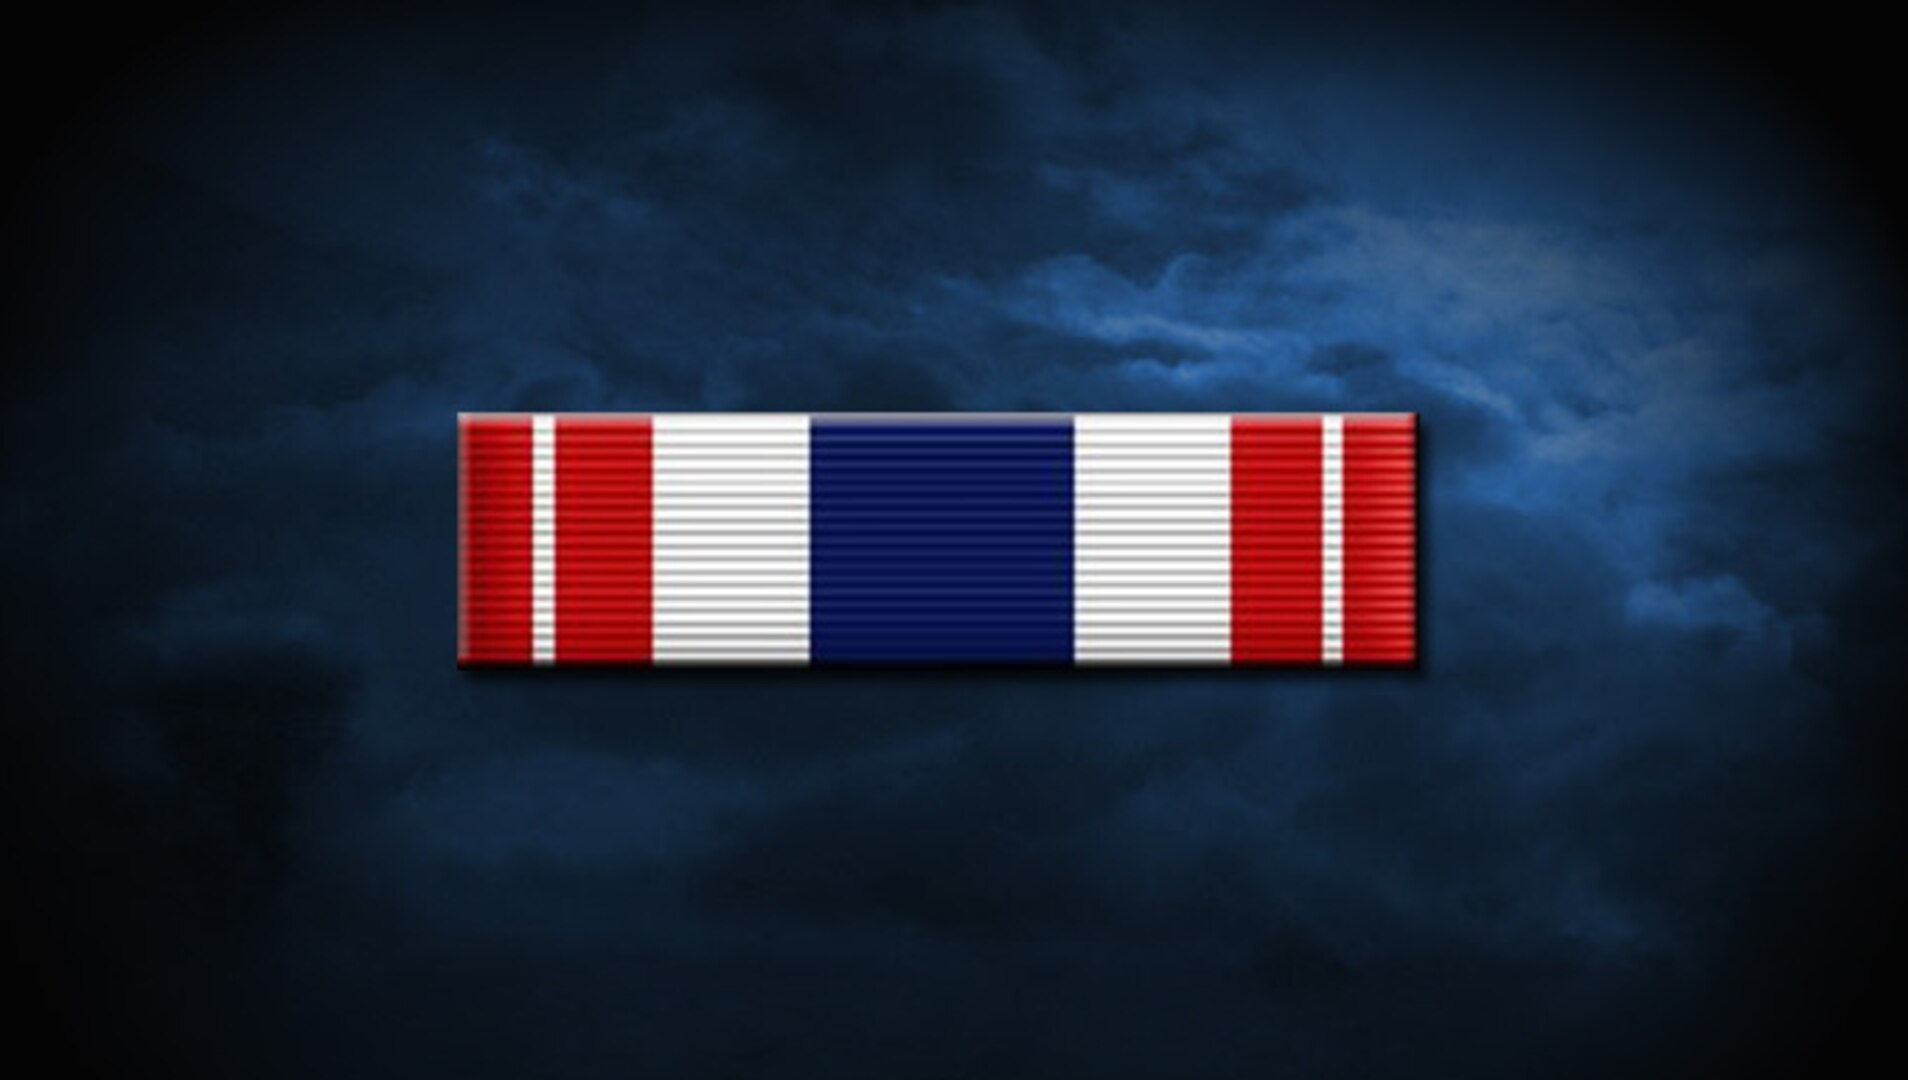 The Meritorious Unit Award is displayed on a blue background.